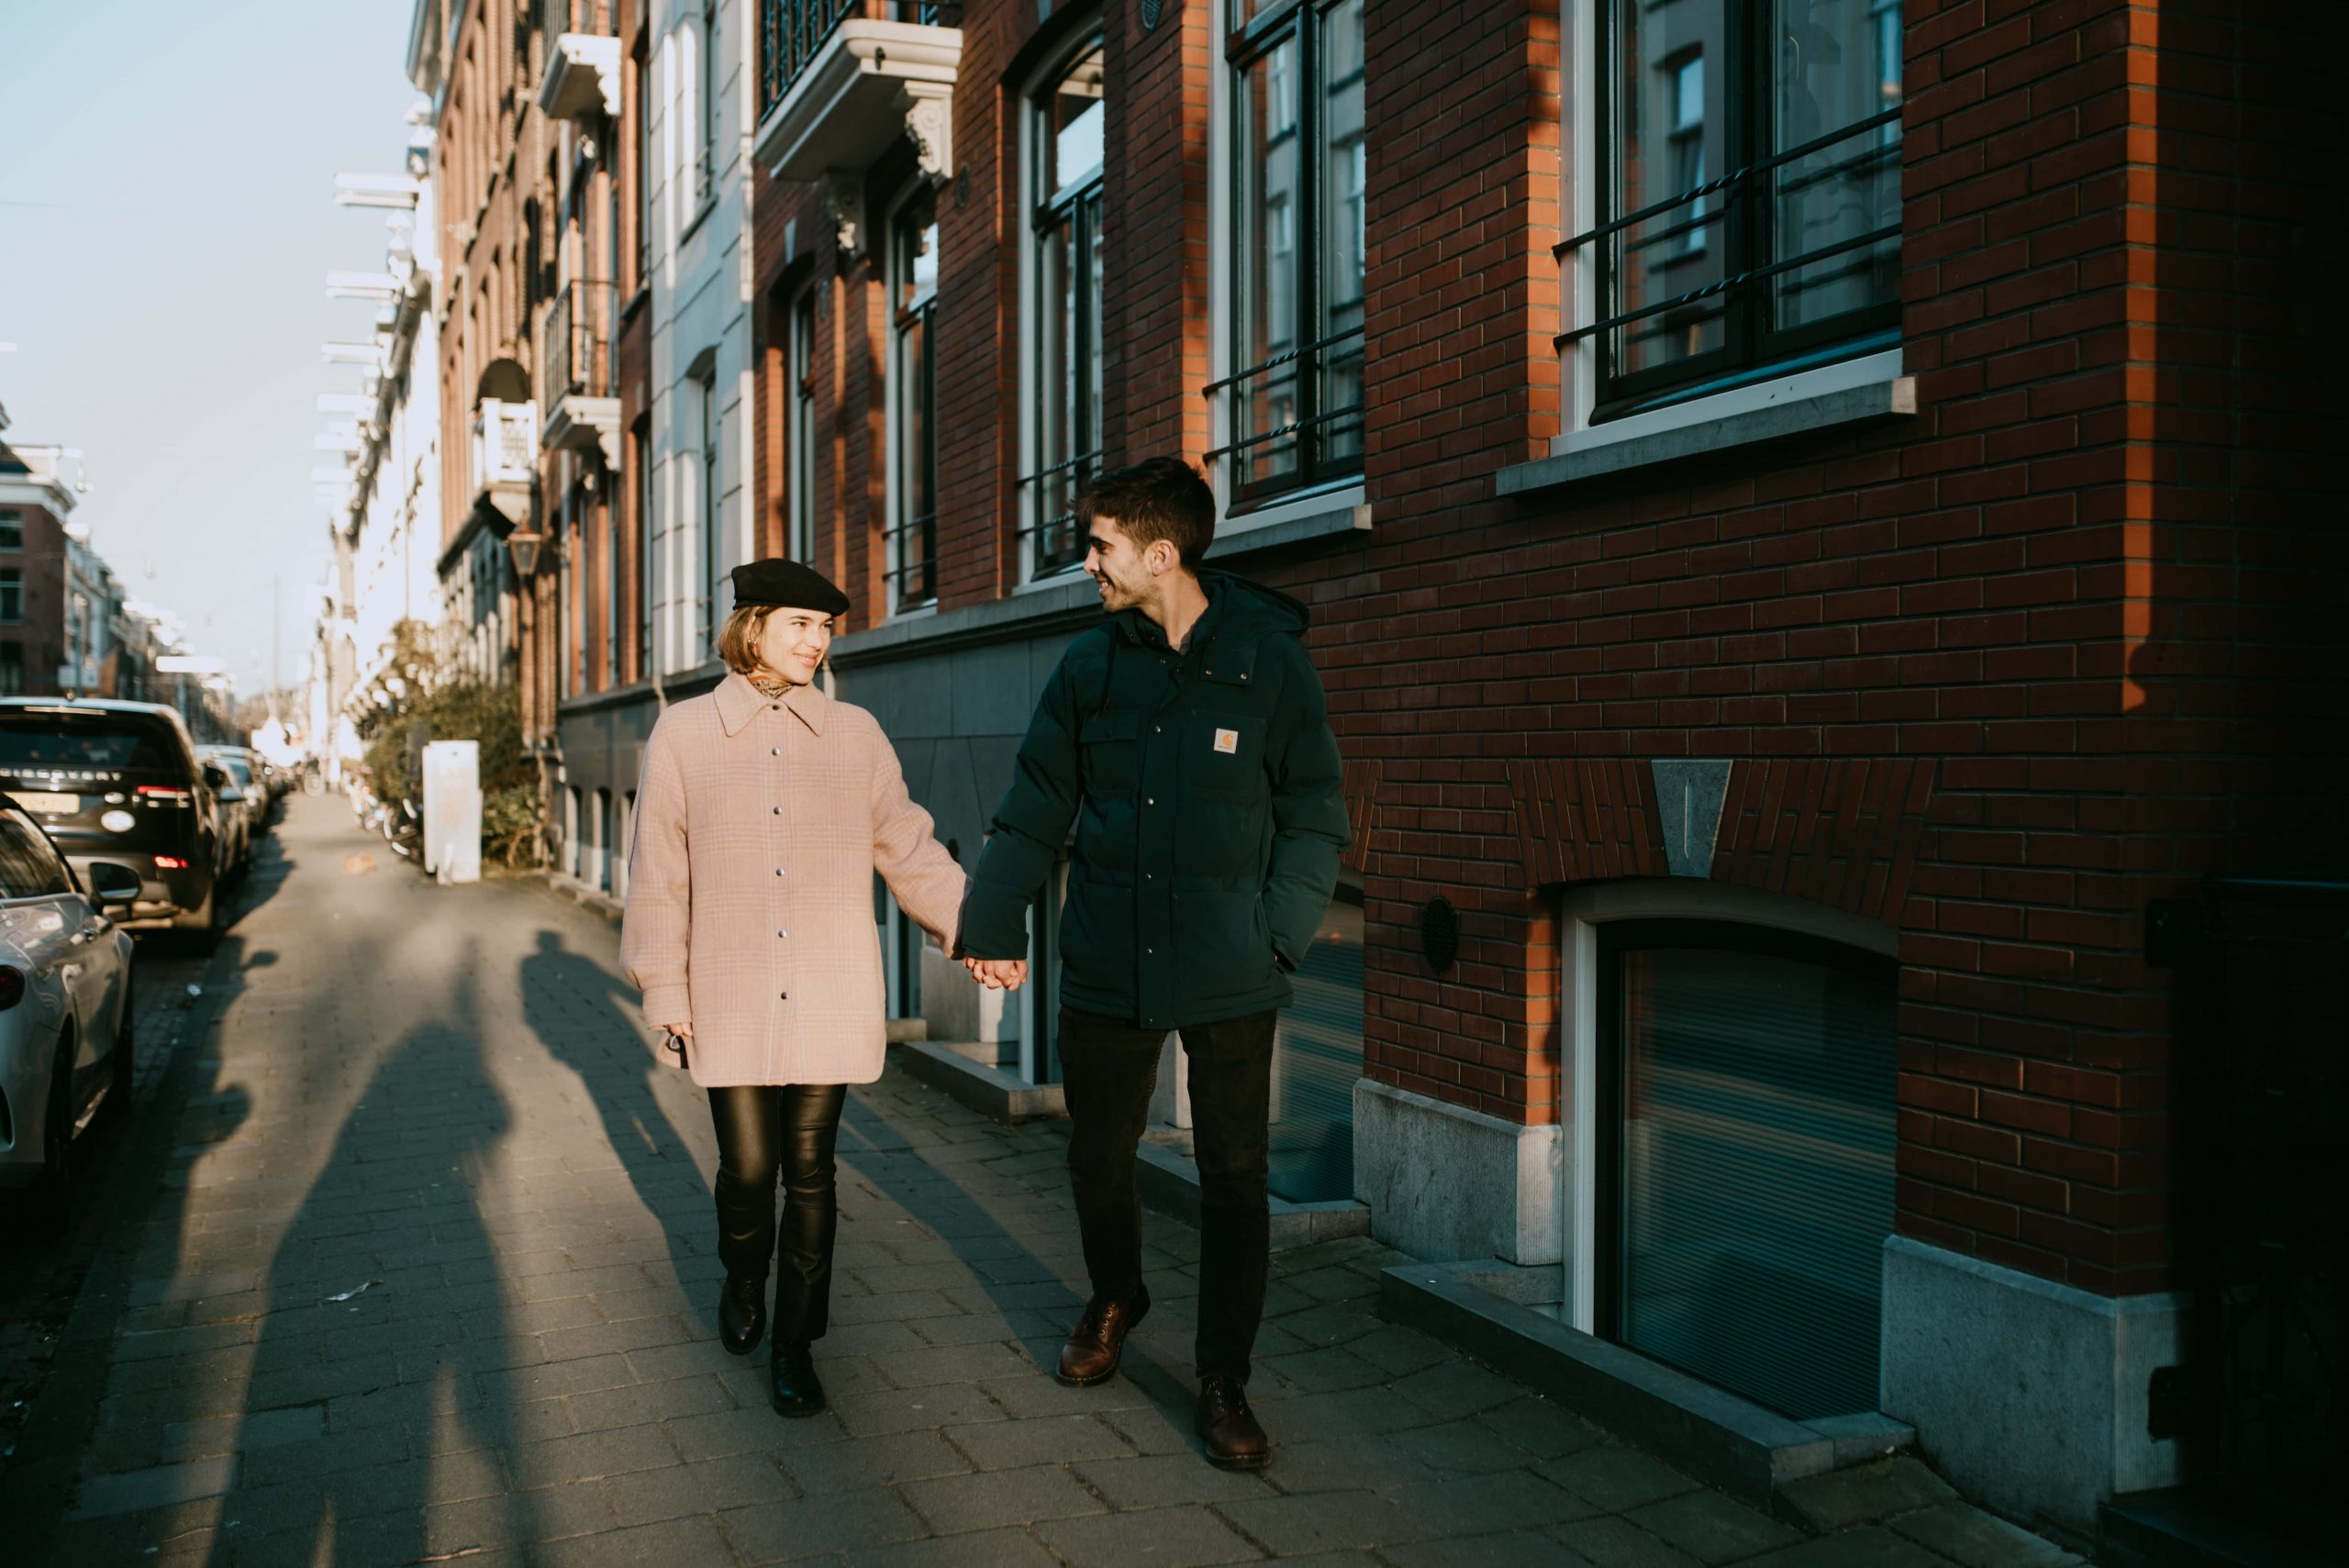 Manu + André – Engagement photoshoot in Amsterdam